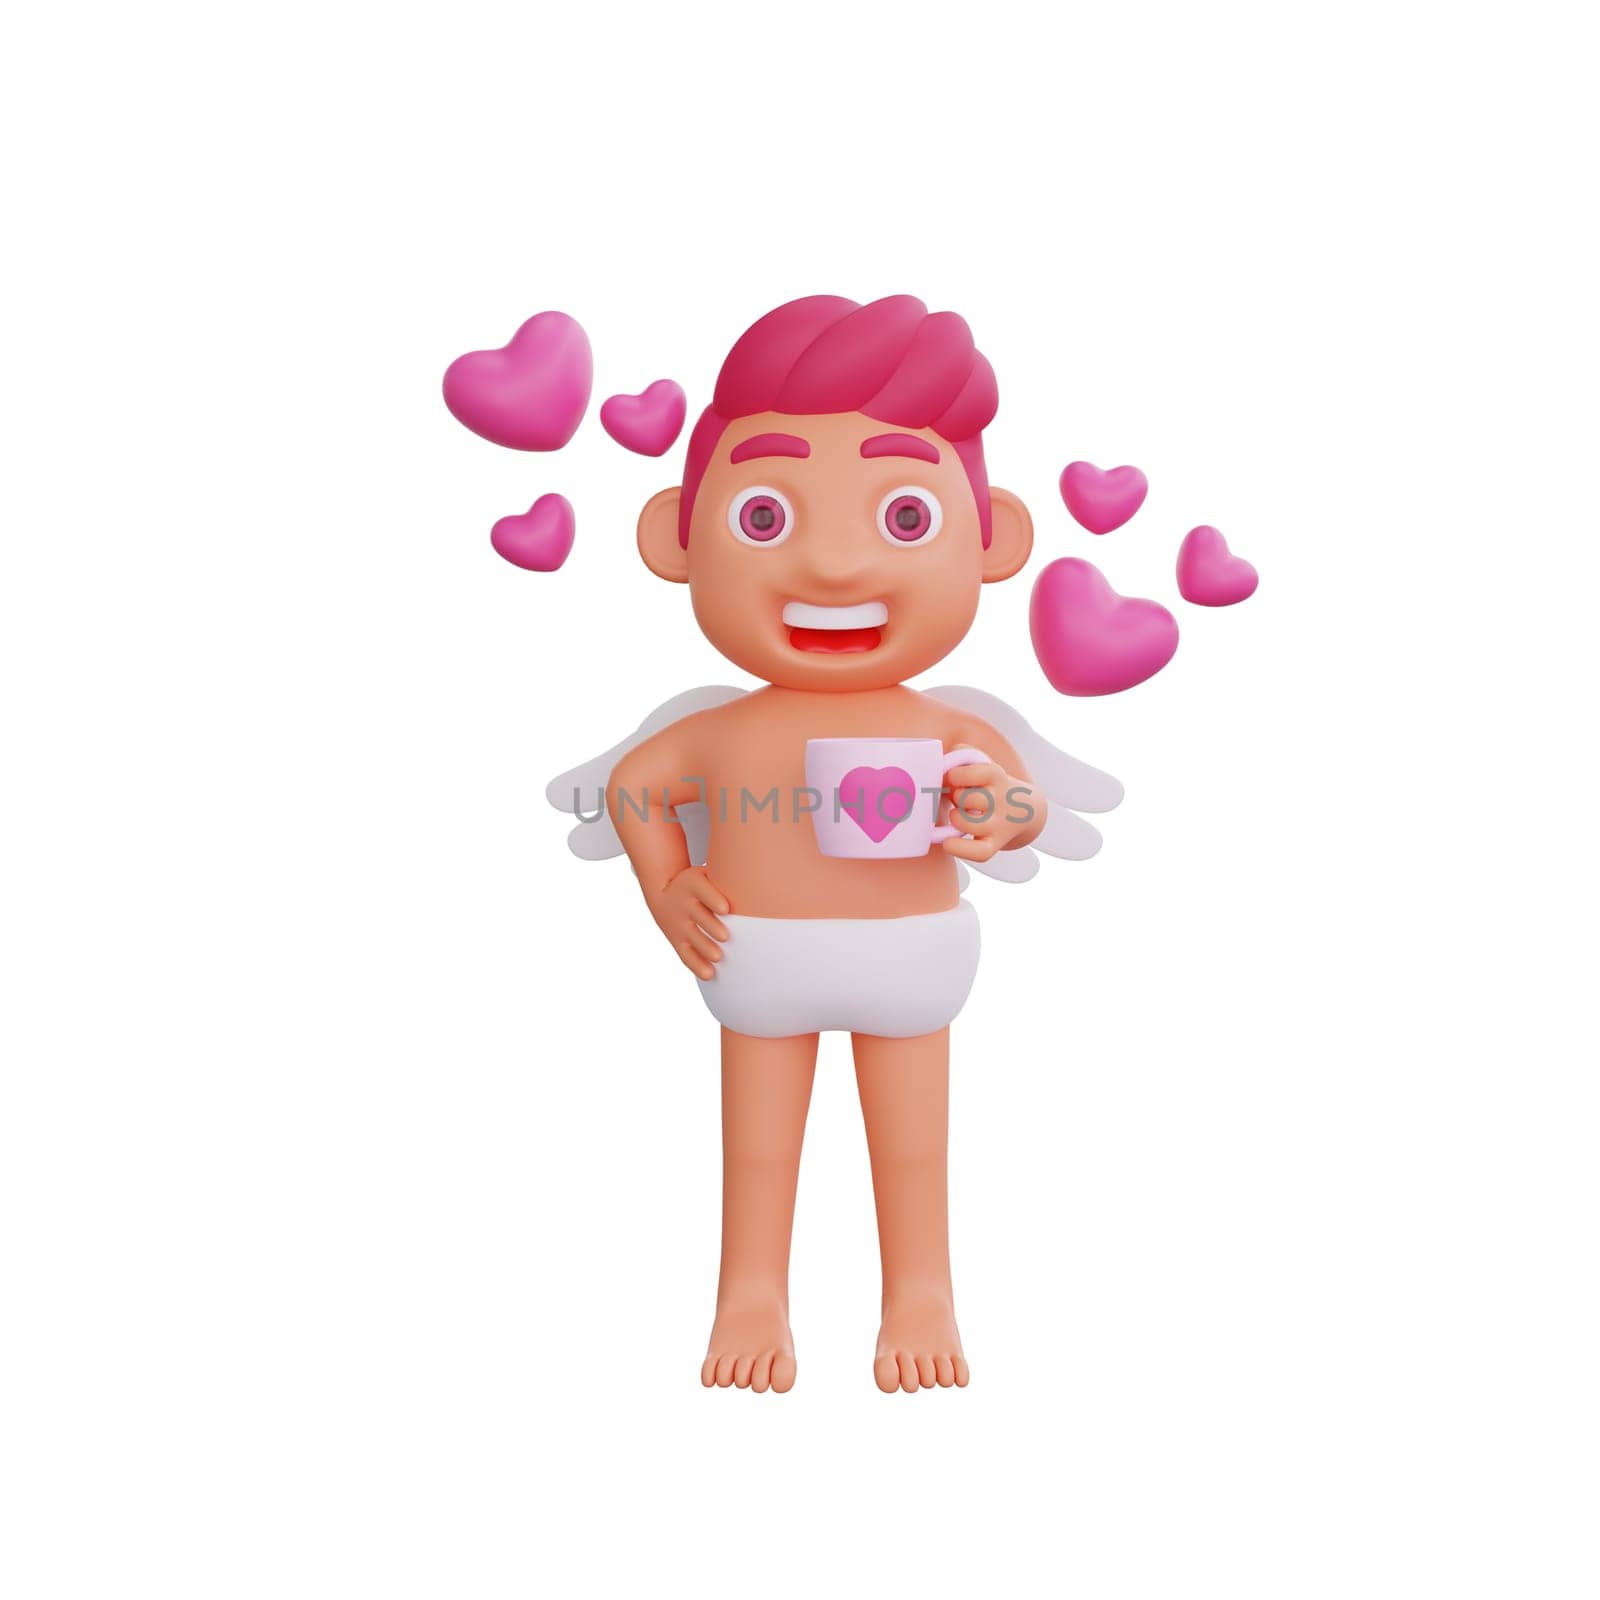 3D illustration of Valentine Cupid character Holding a love-shaped glass surrounded by floating hearts, perfect for Valentine or love themed projects